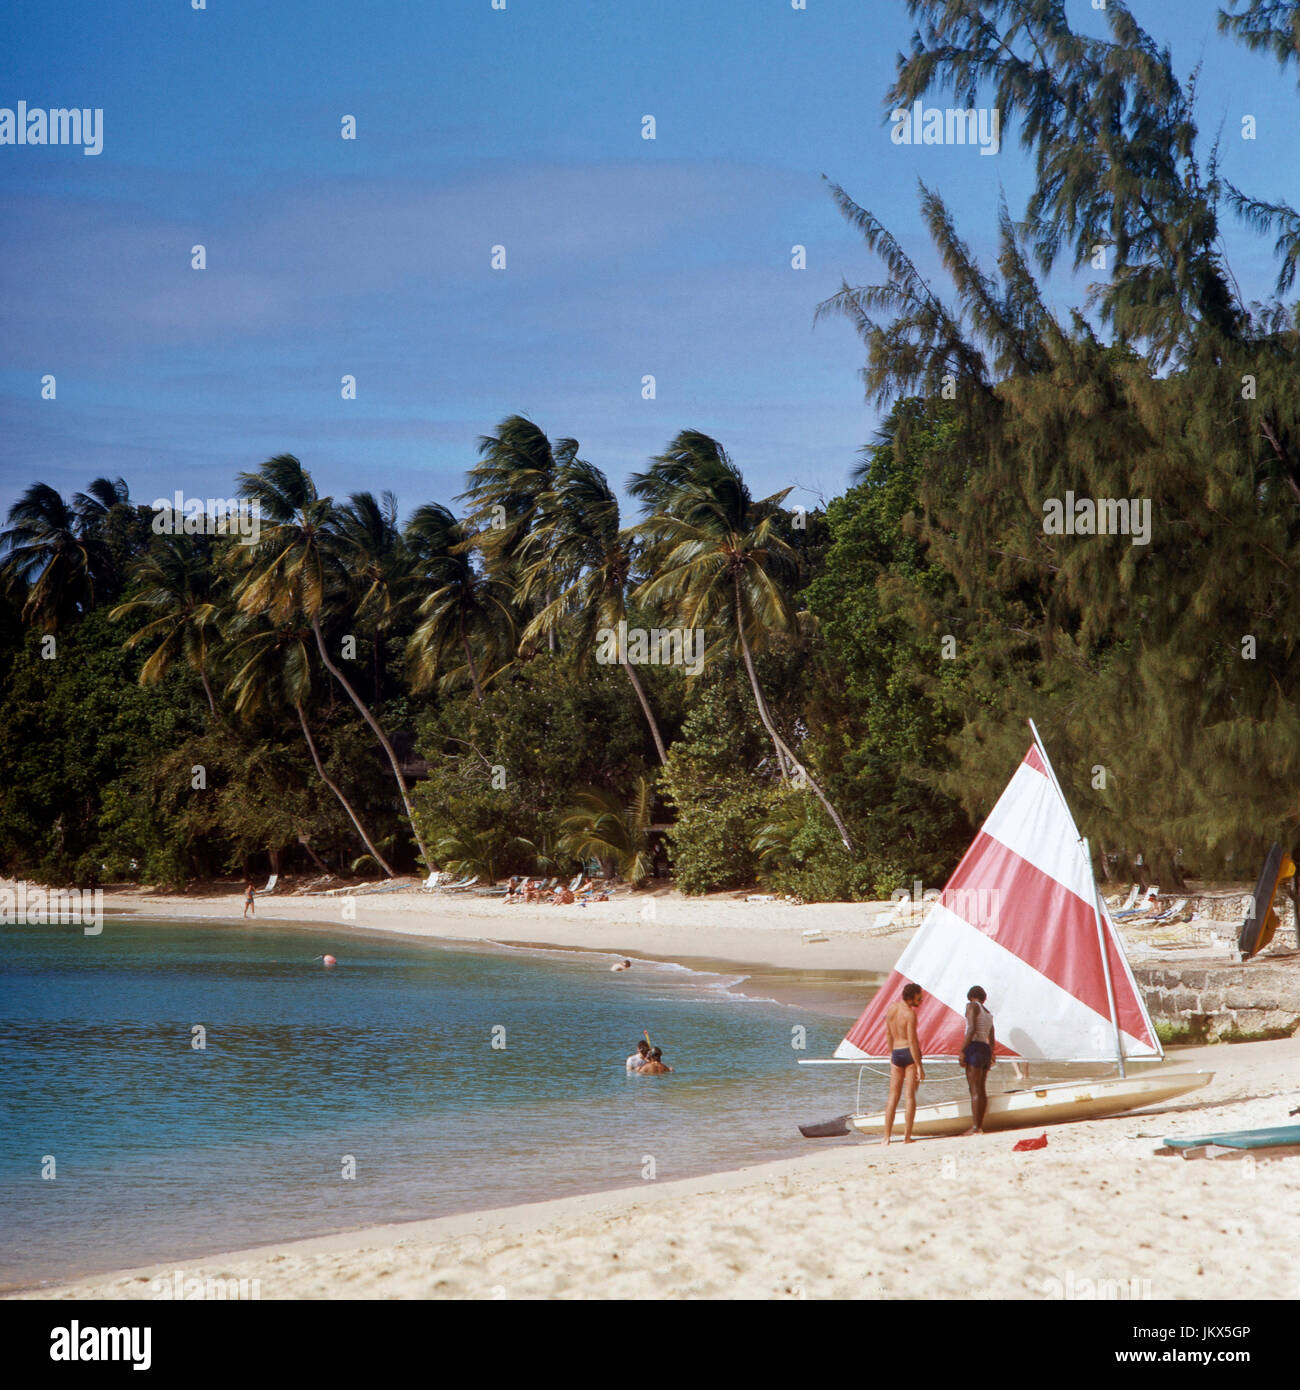 Palmenstrand mit Segelboot, Barbados 1980er Jahre. Beach with palm trees and sailing boat, Barbados 1980s. Stock Photo